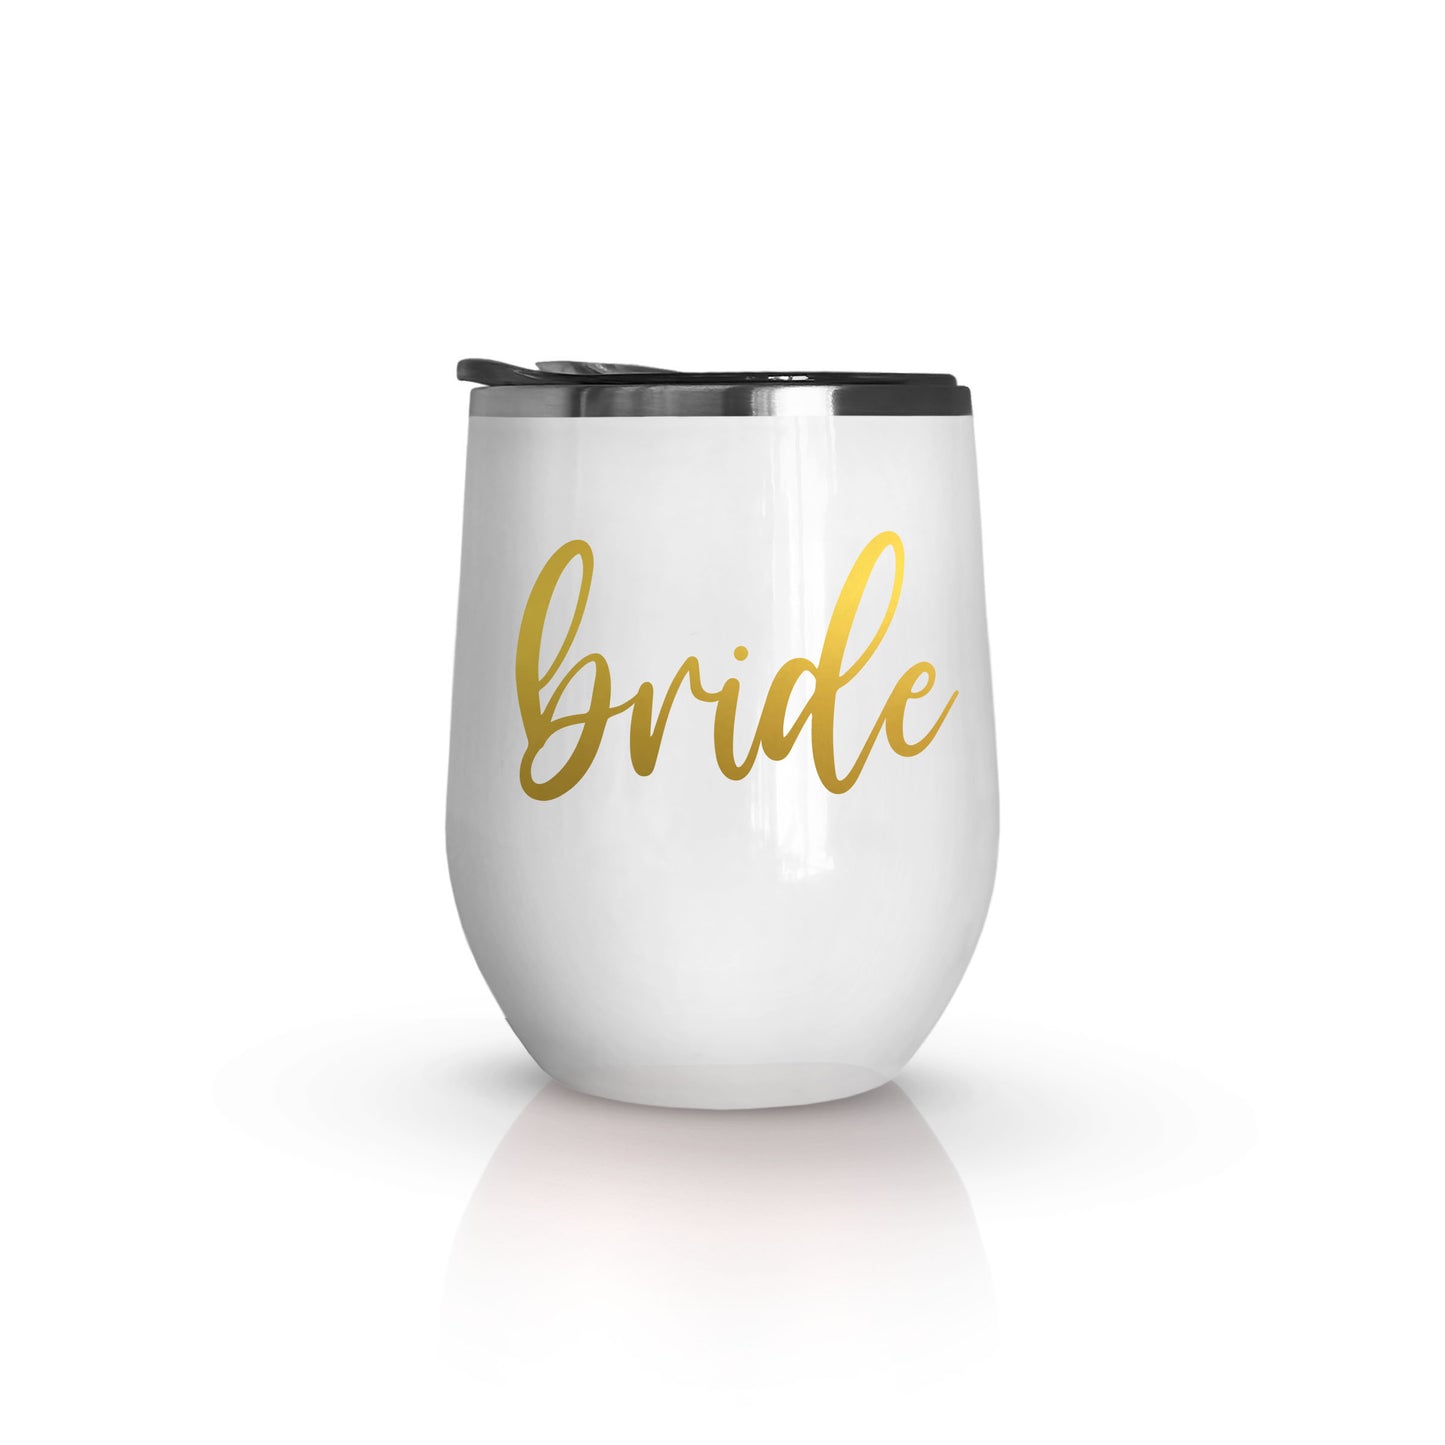 Bride, Babe, Babe of Honor Wine Tumblers